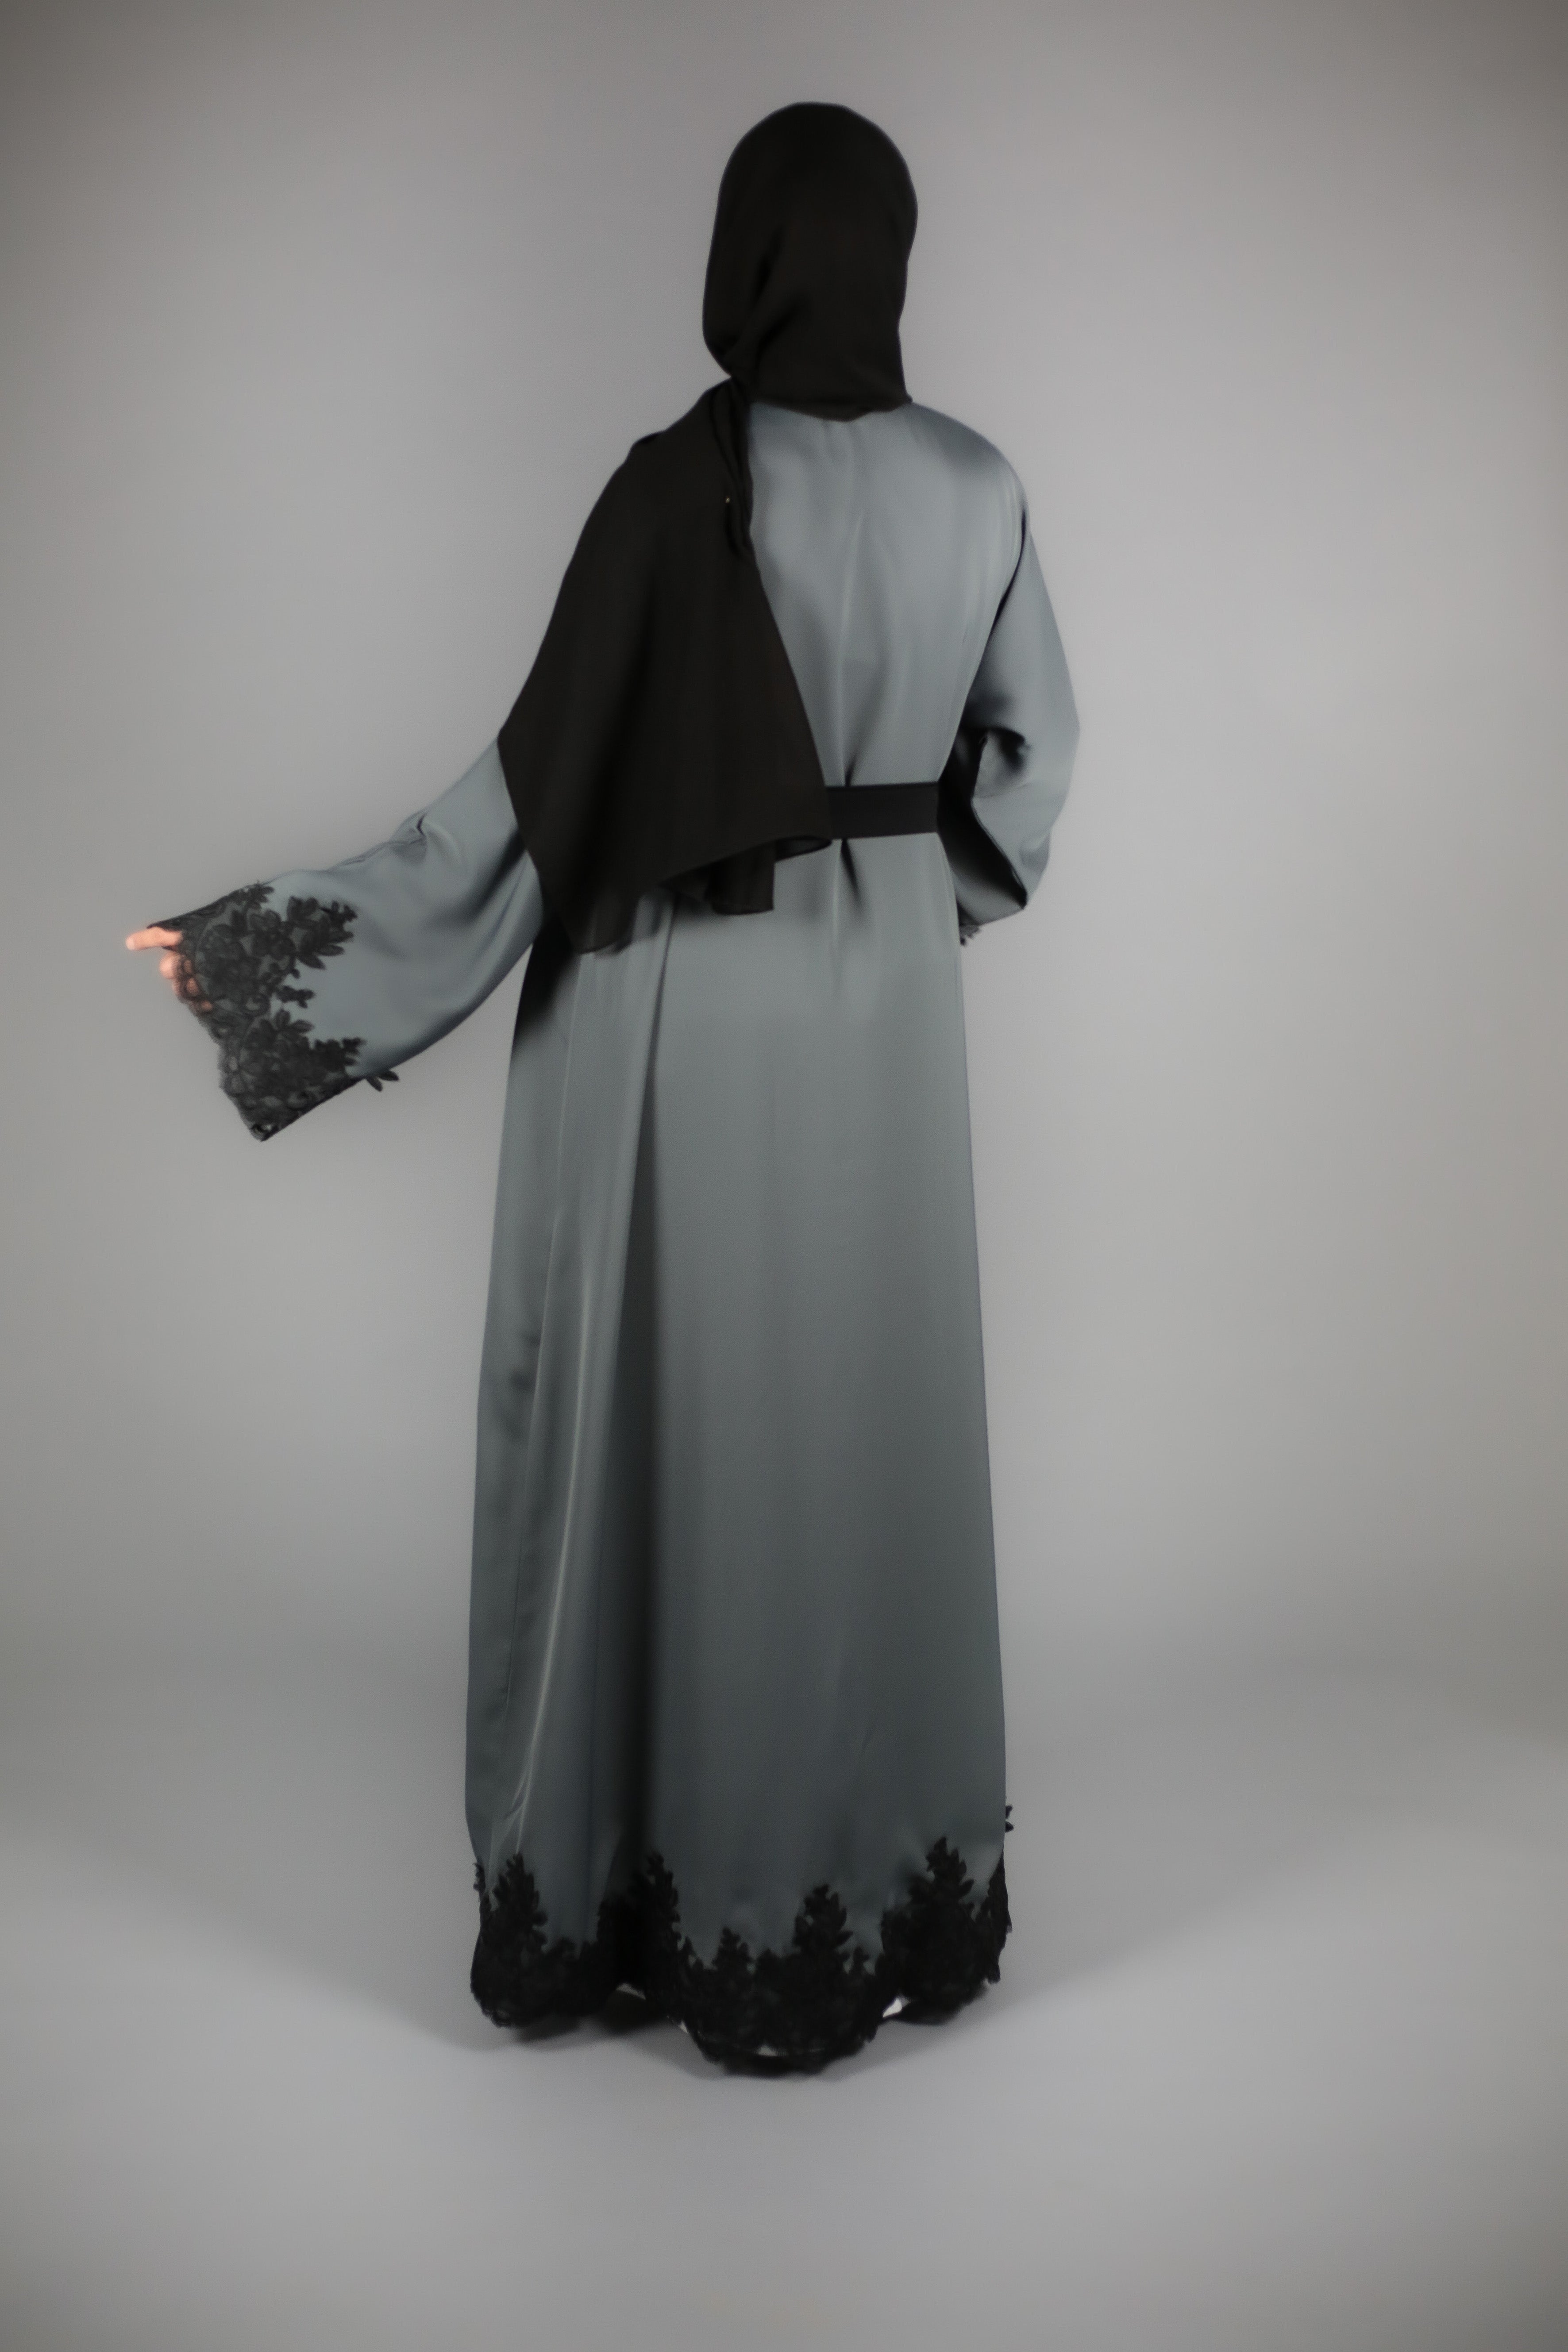 Charcoal Grey Open Abaya With Black Lace